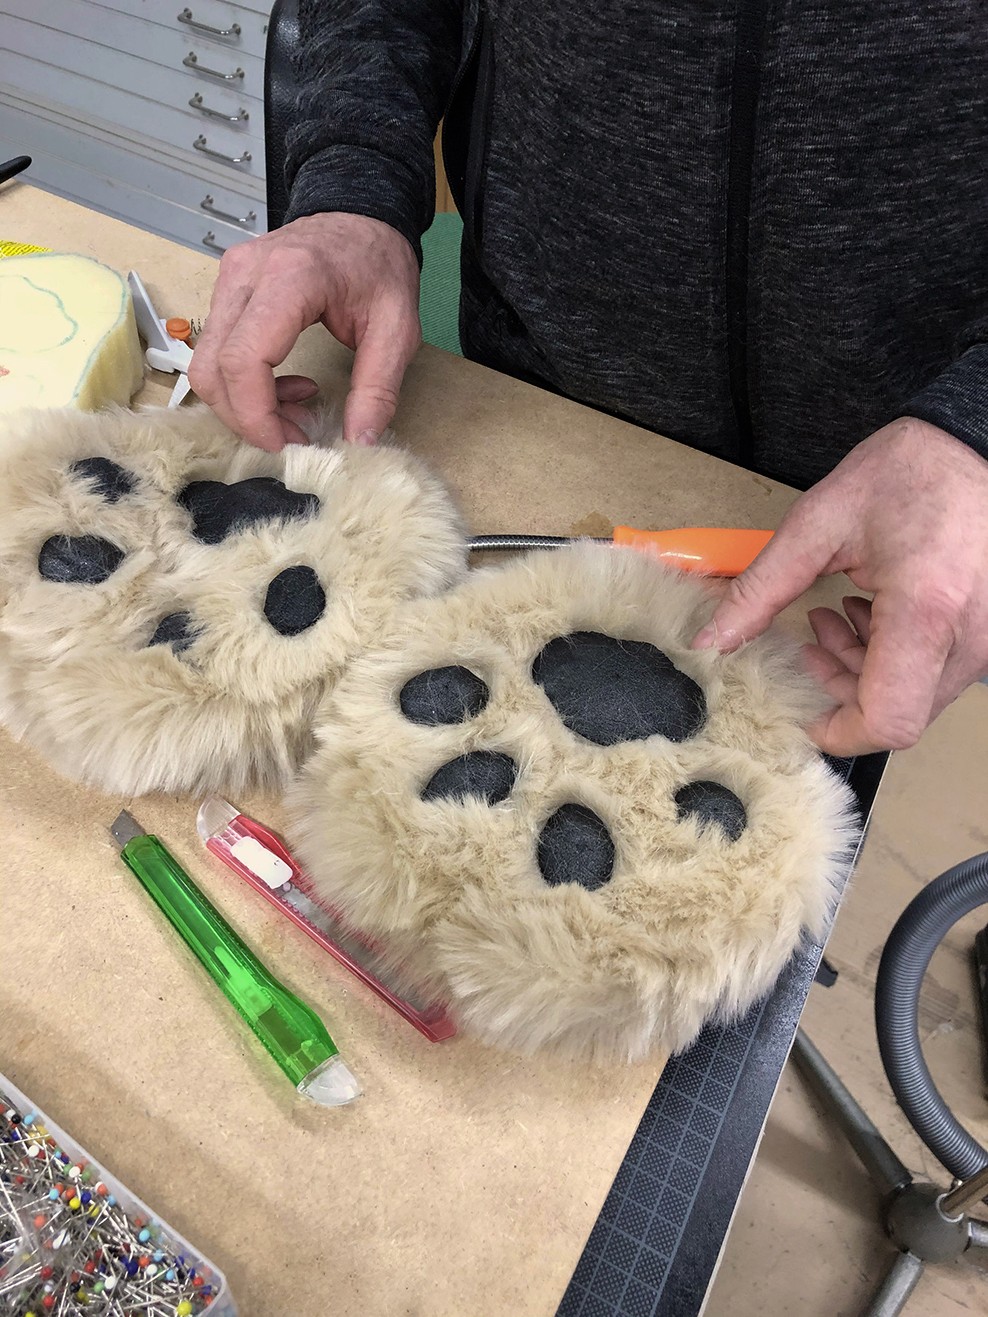 Lion puppet paws on the table.